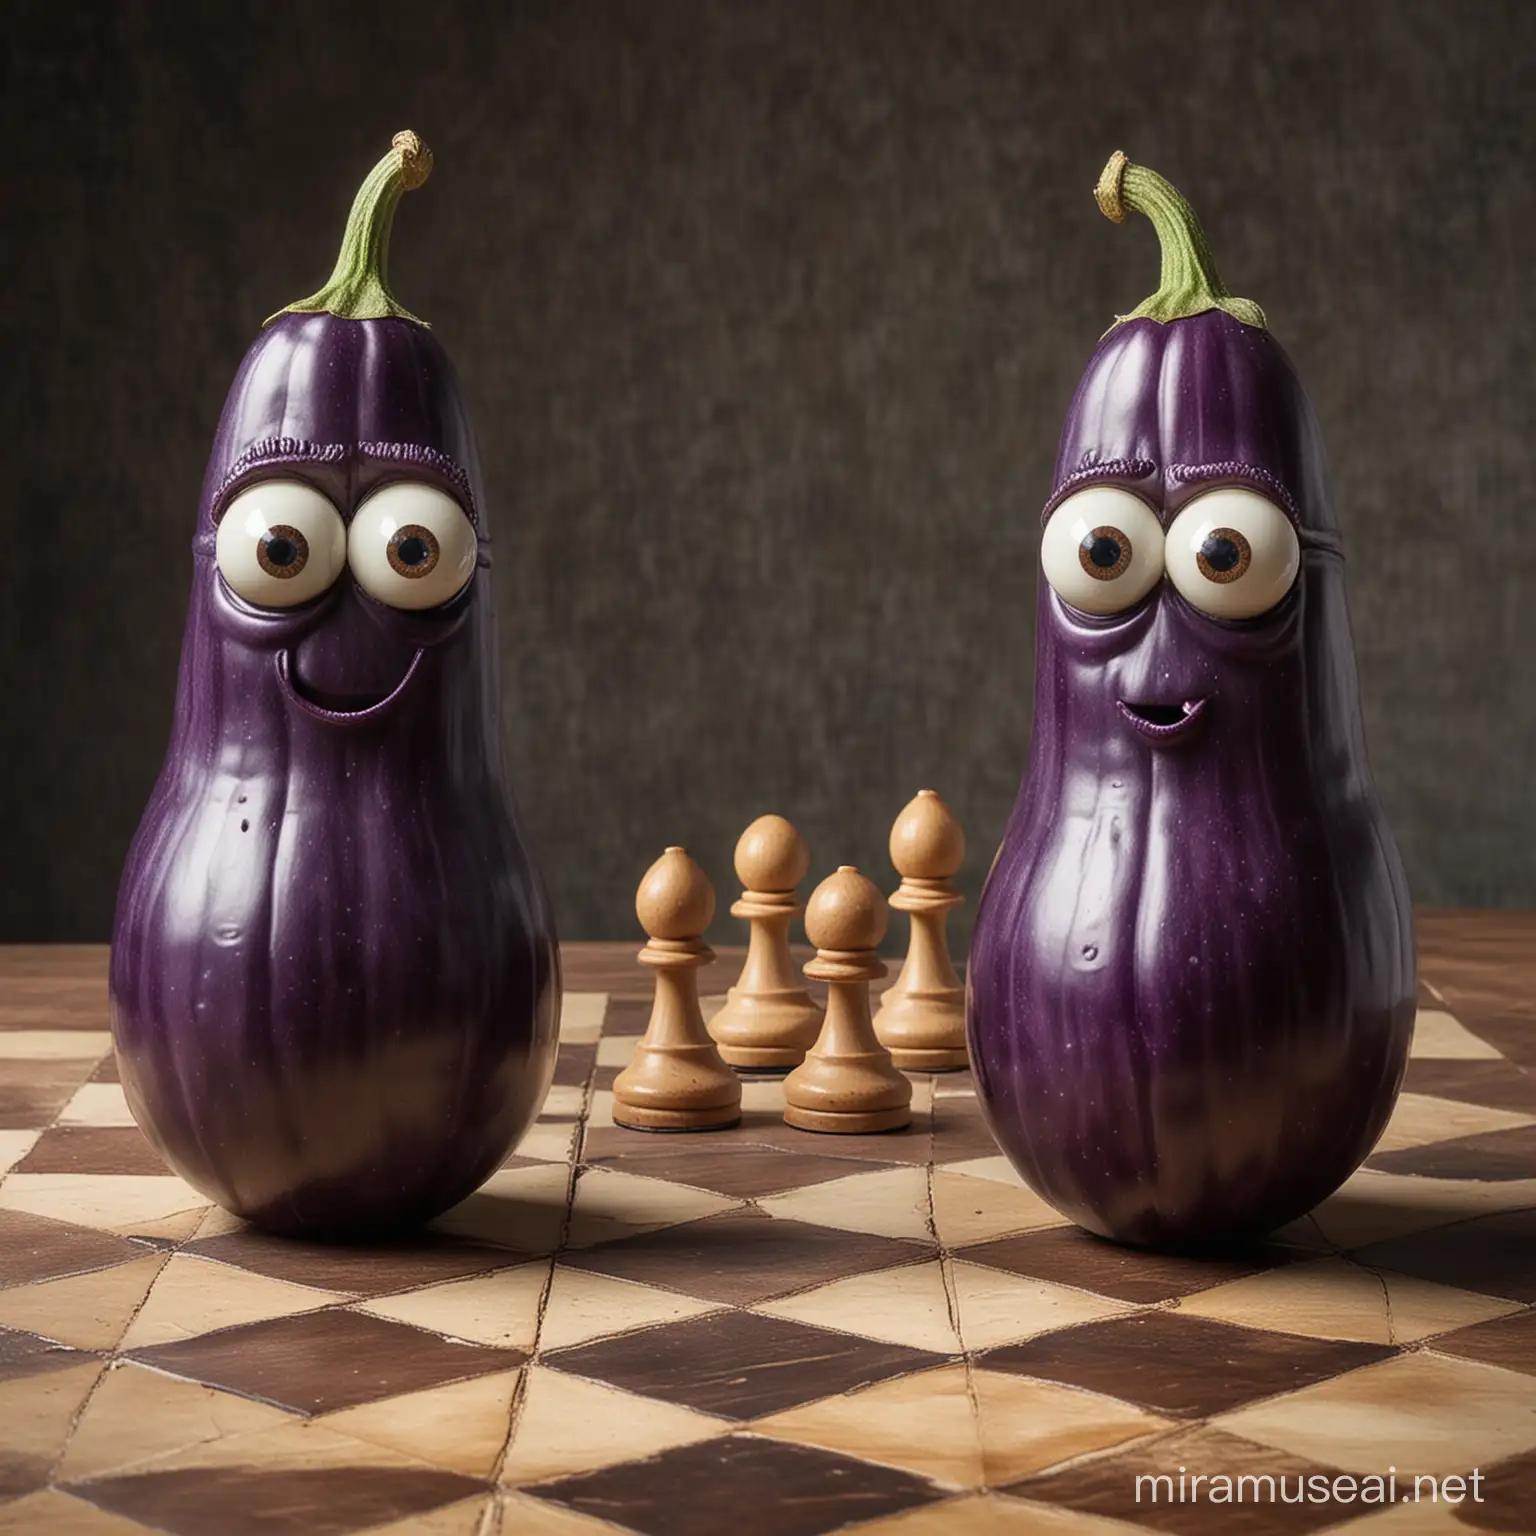 two large phallic googly-eyed eggplants playing chess against each other